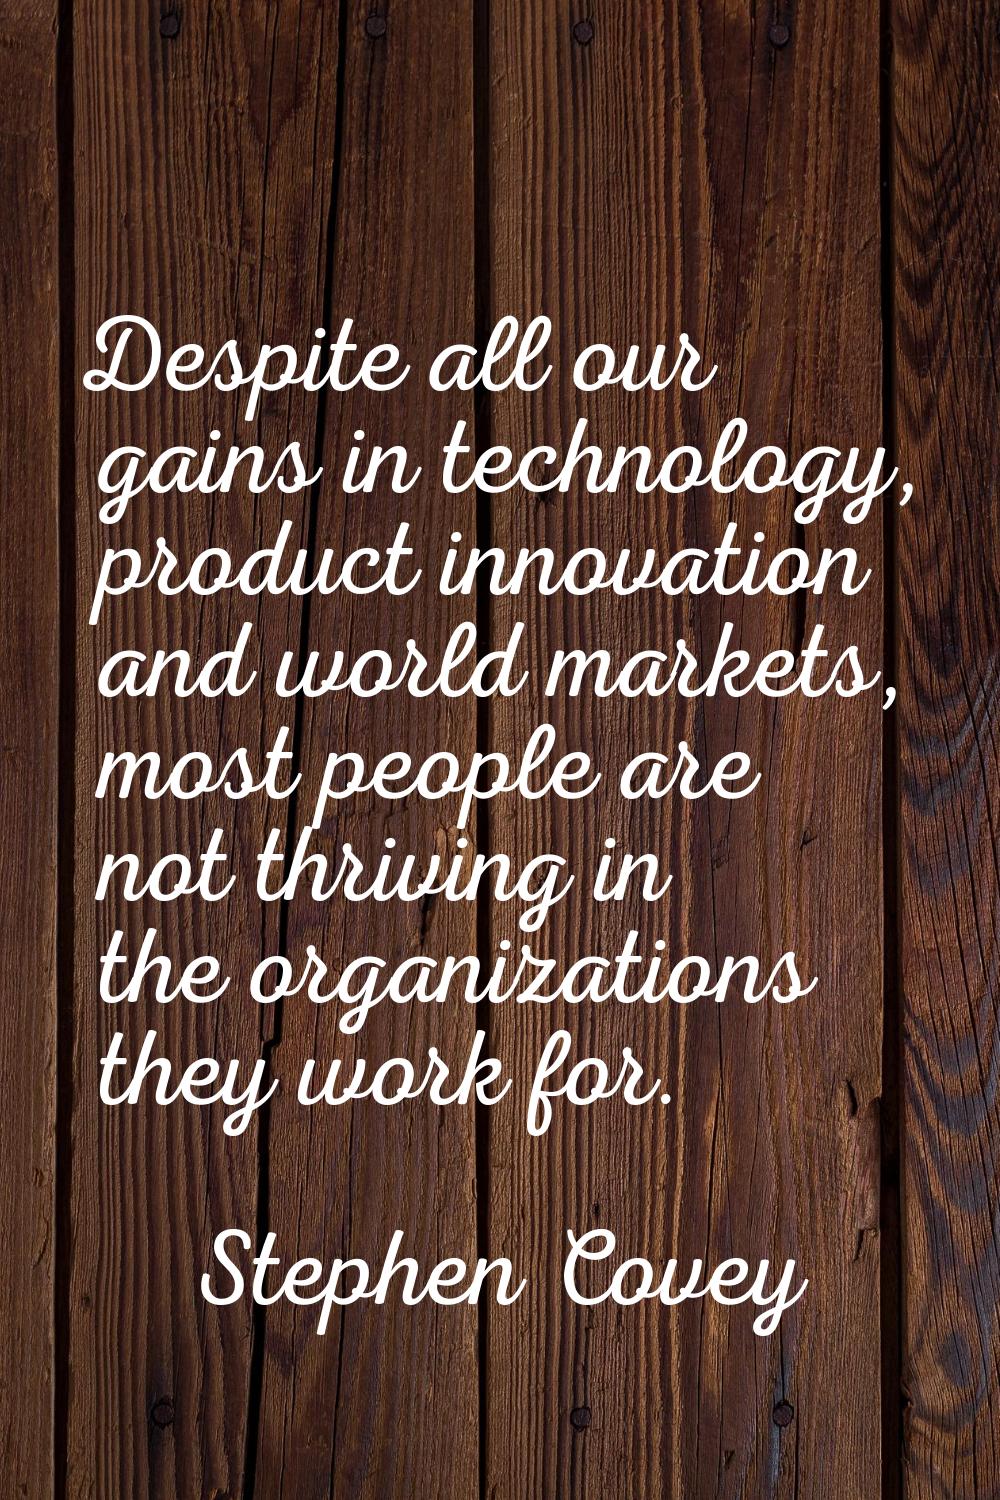 Despite all our gains in technology, product innovation and world markets, most people are not thri